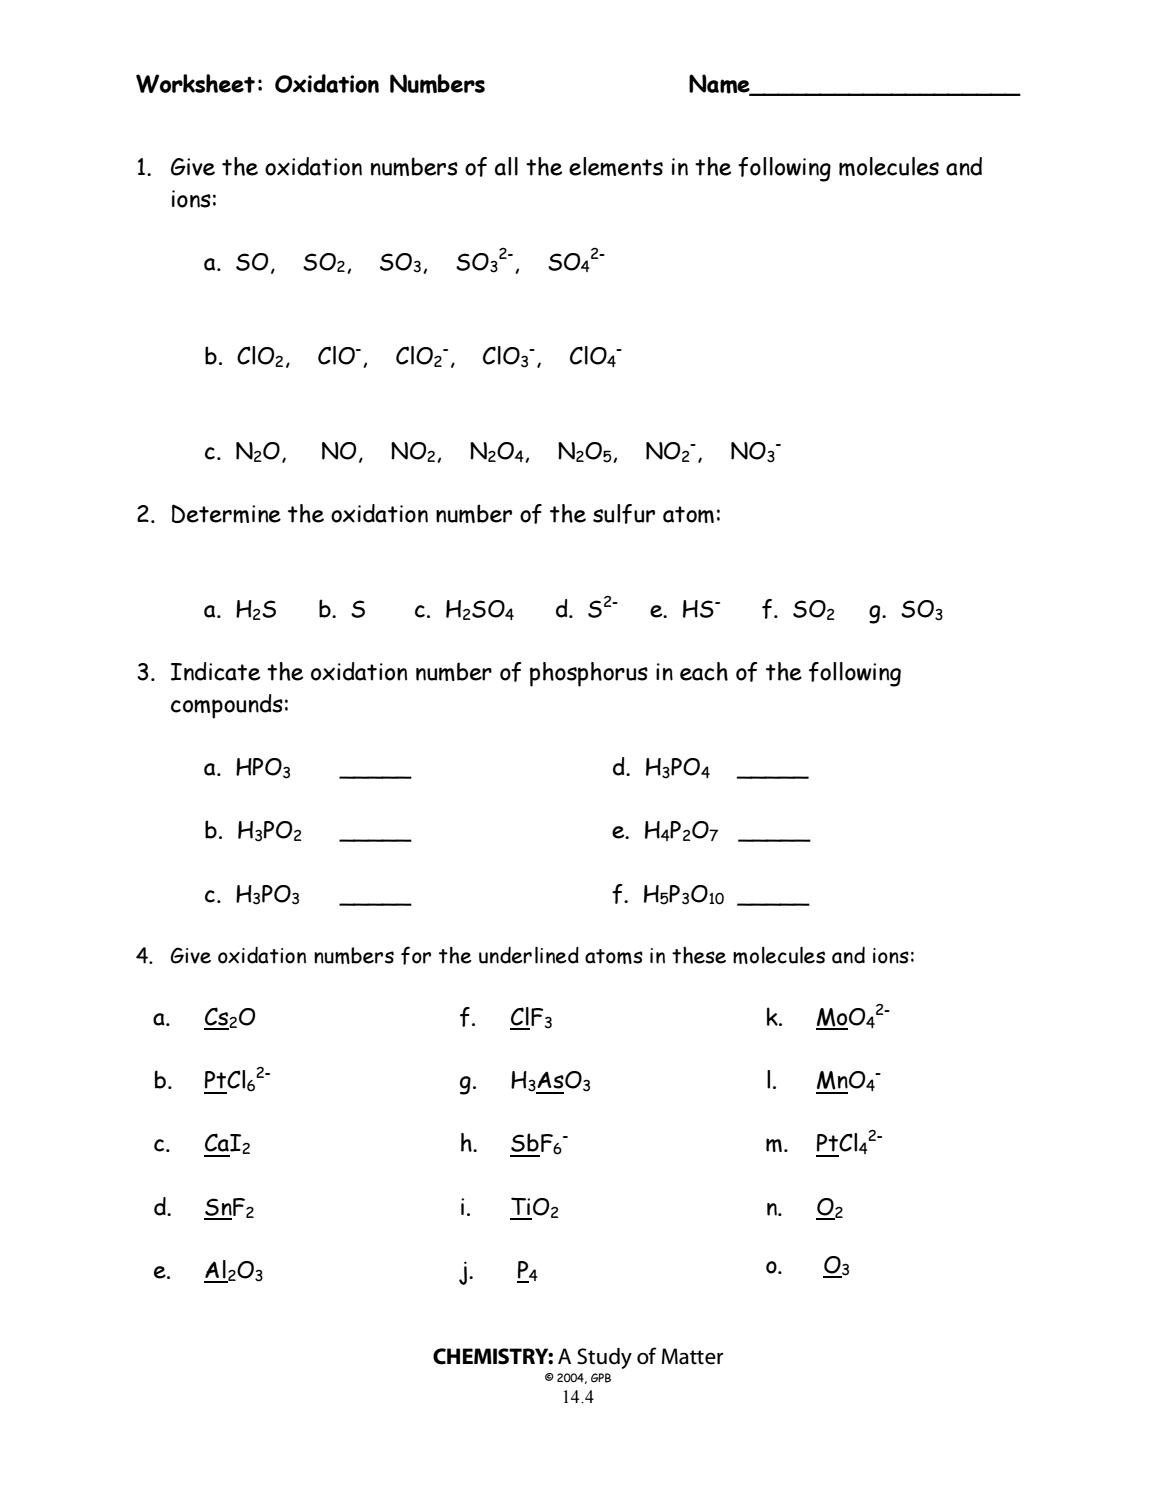 Atoms and Molecules Worksheet Oxidation Numbers Worksheet by Olivia Hunter issuu